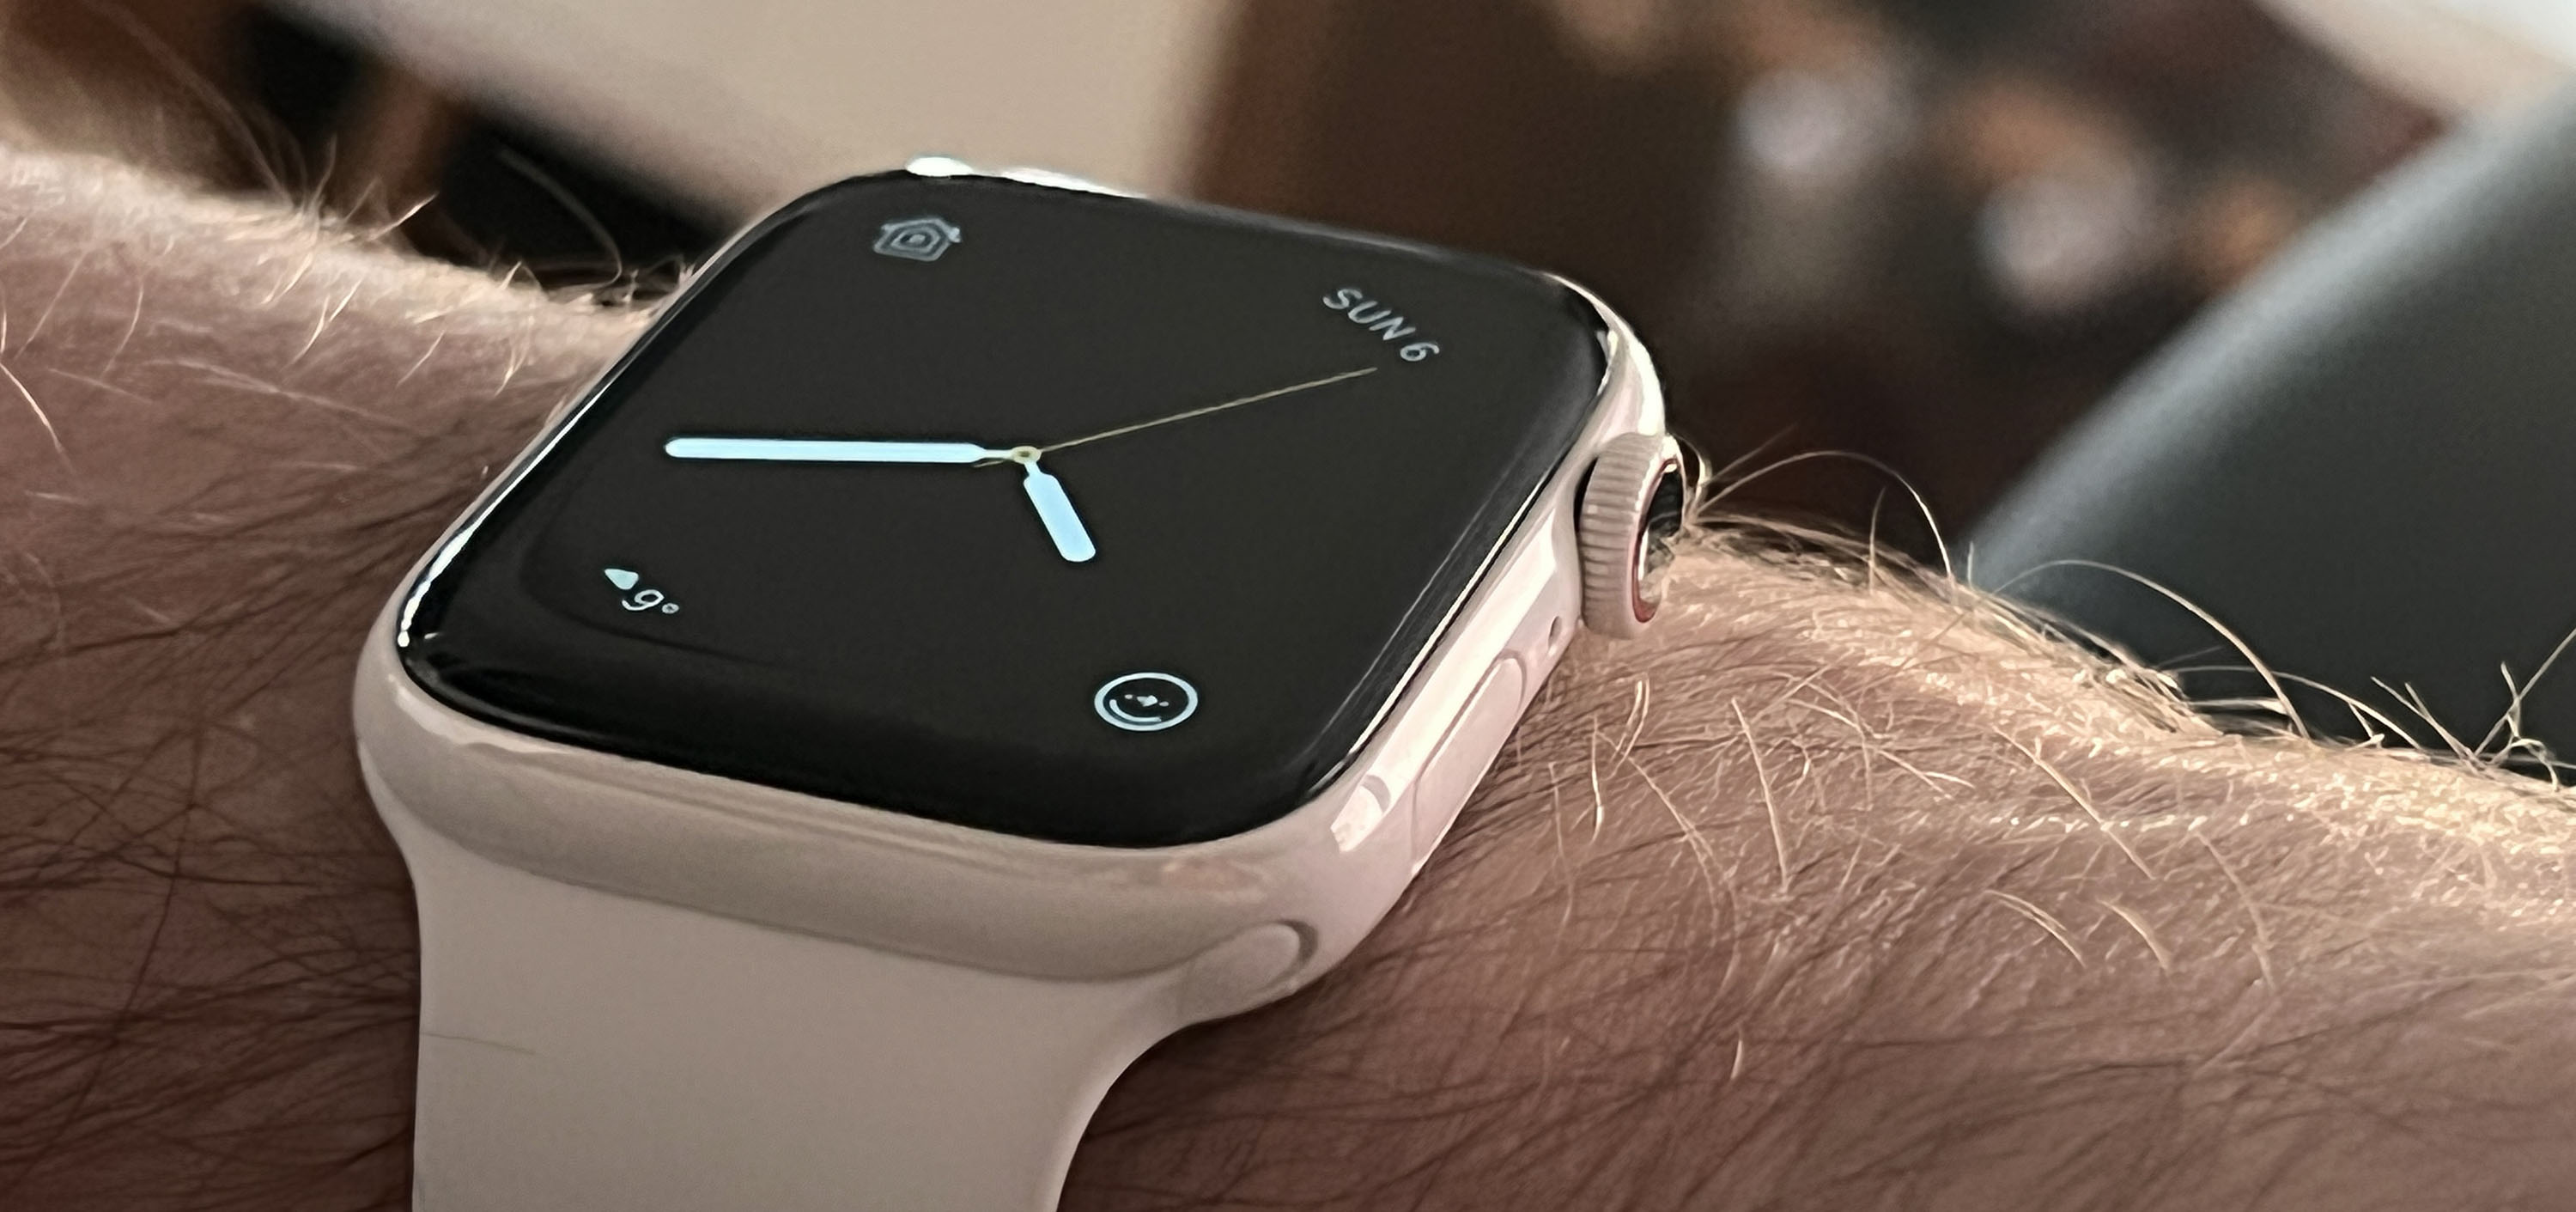 Ceramic Apple Watch Series 5 still looks great two years later